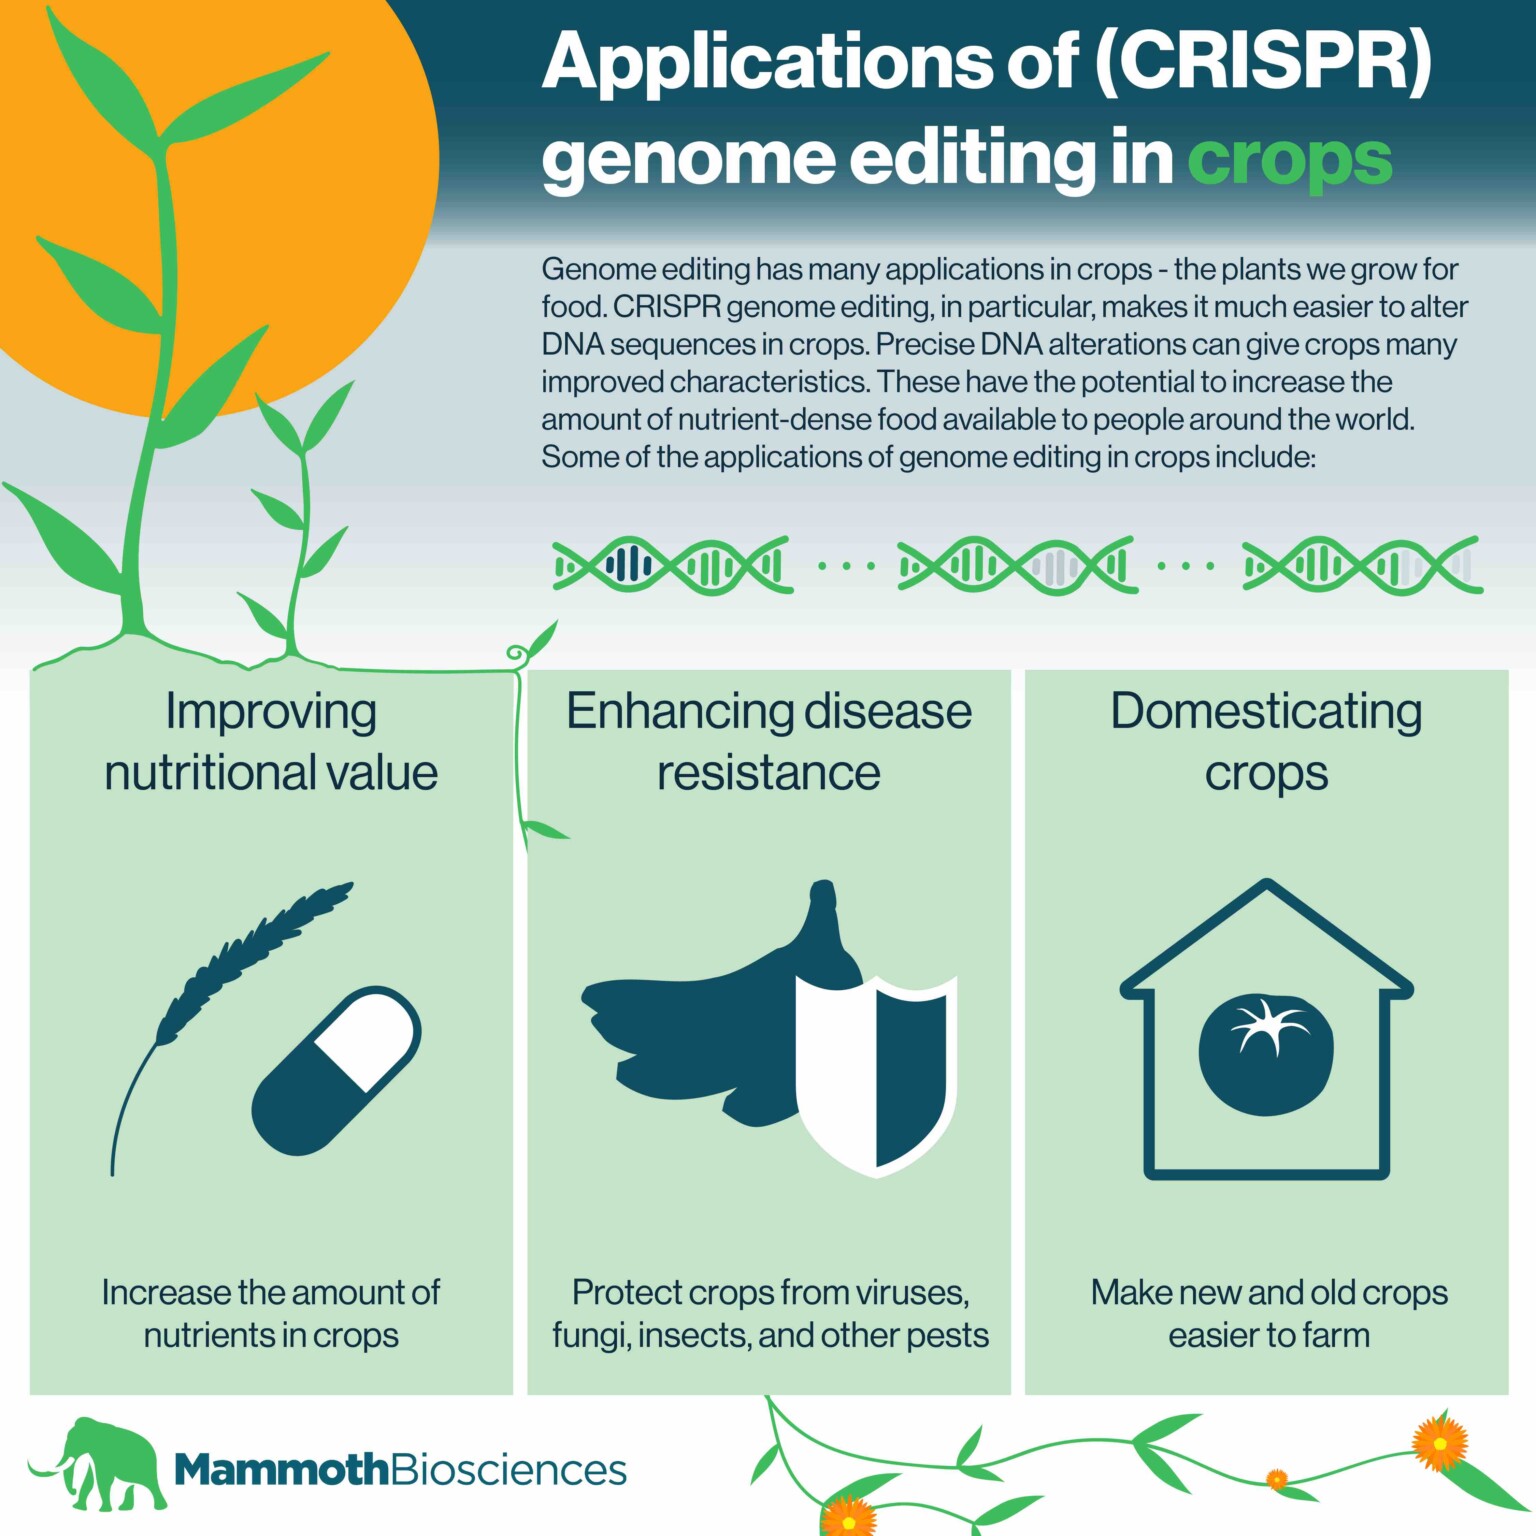 a report on the recent application of genetic research